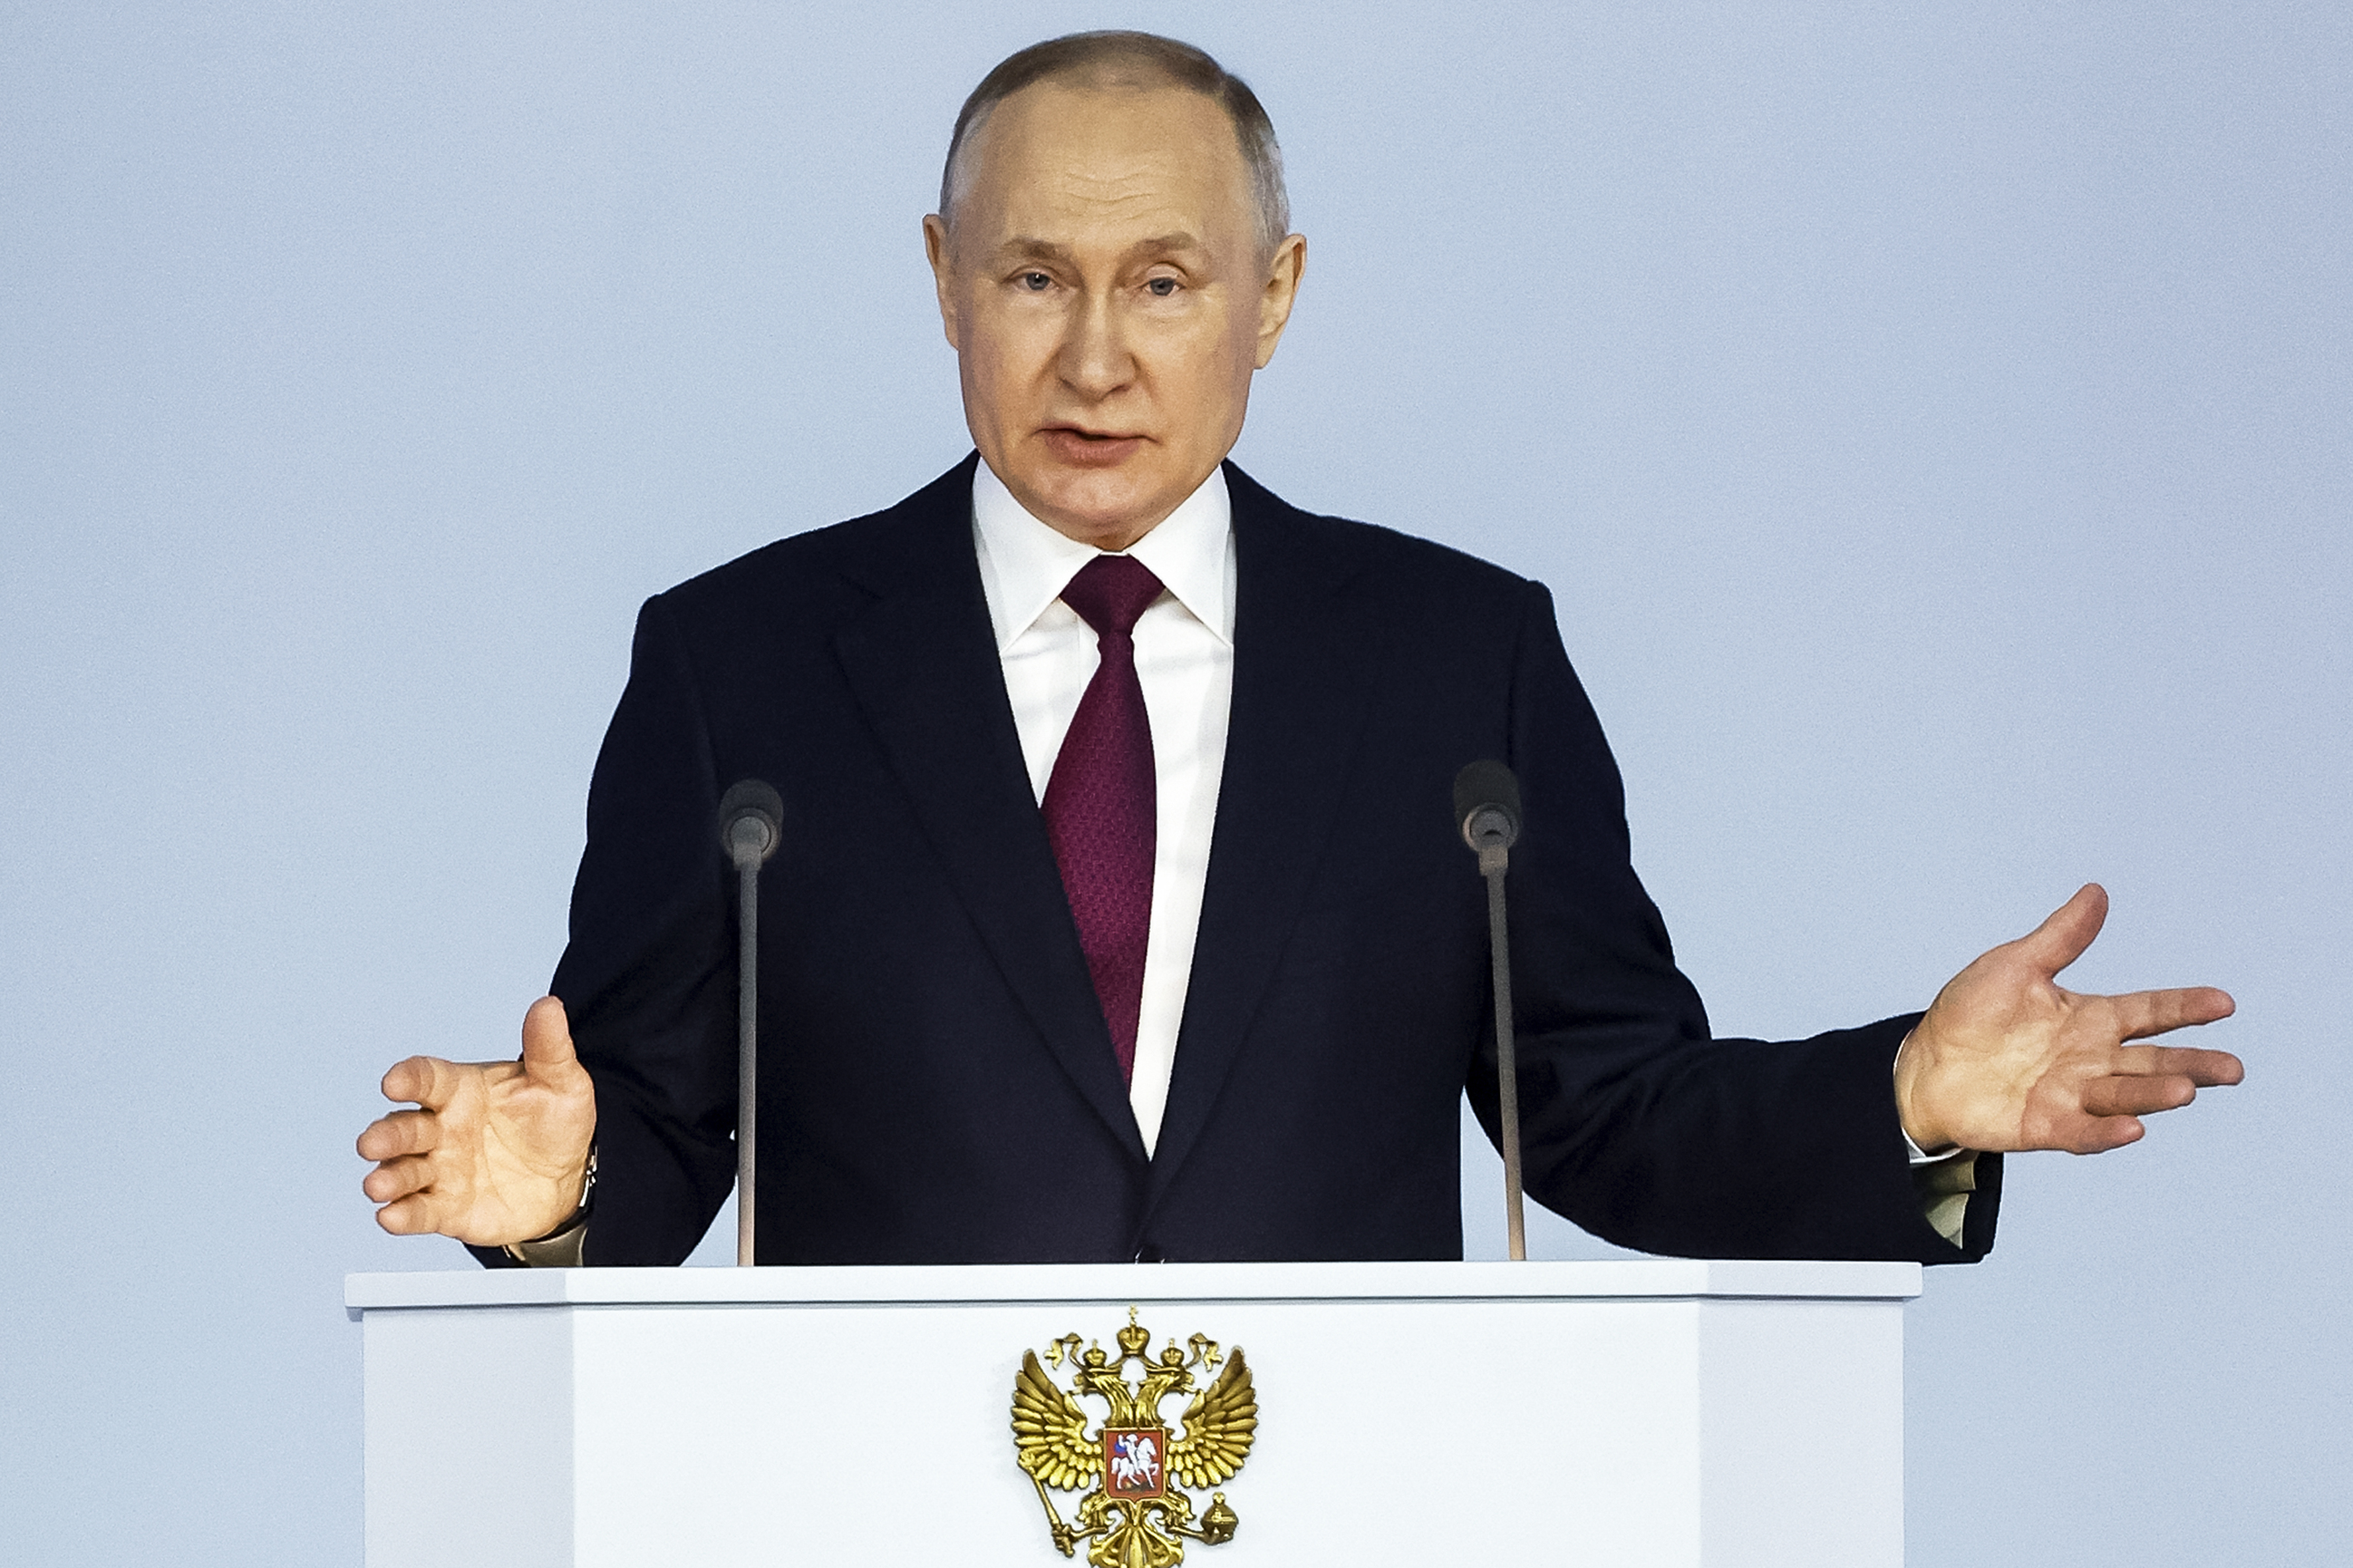 Russian President Vladimir Putin gestures as he gives his annual state of the nation address in Moscow, Russia, Tuesday, Feb. 21, 2023 